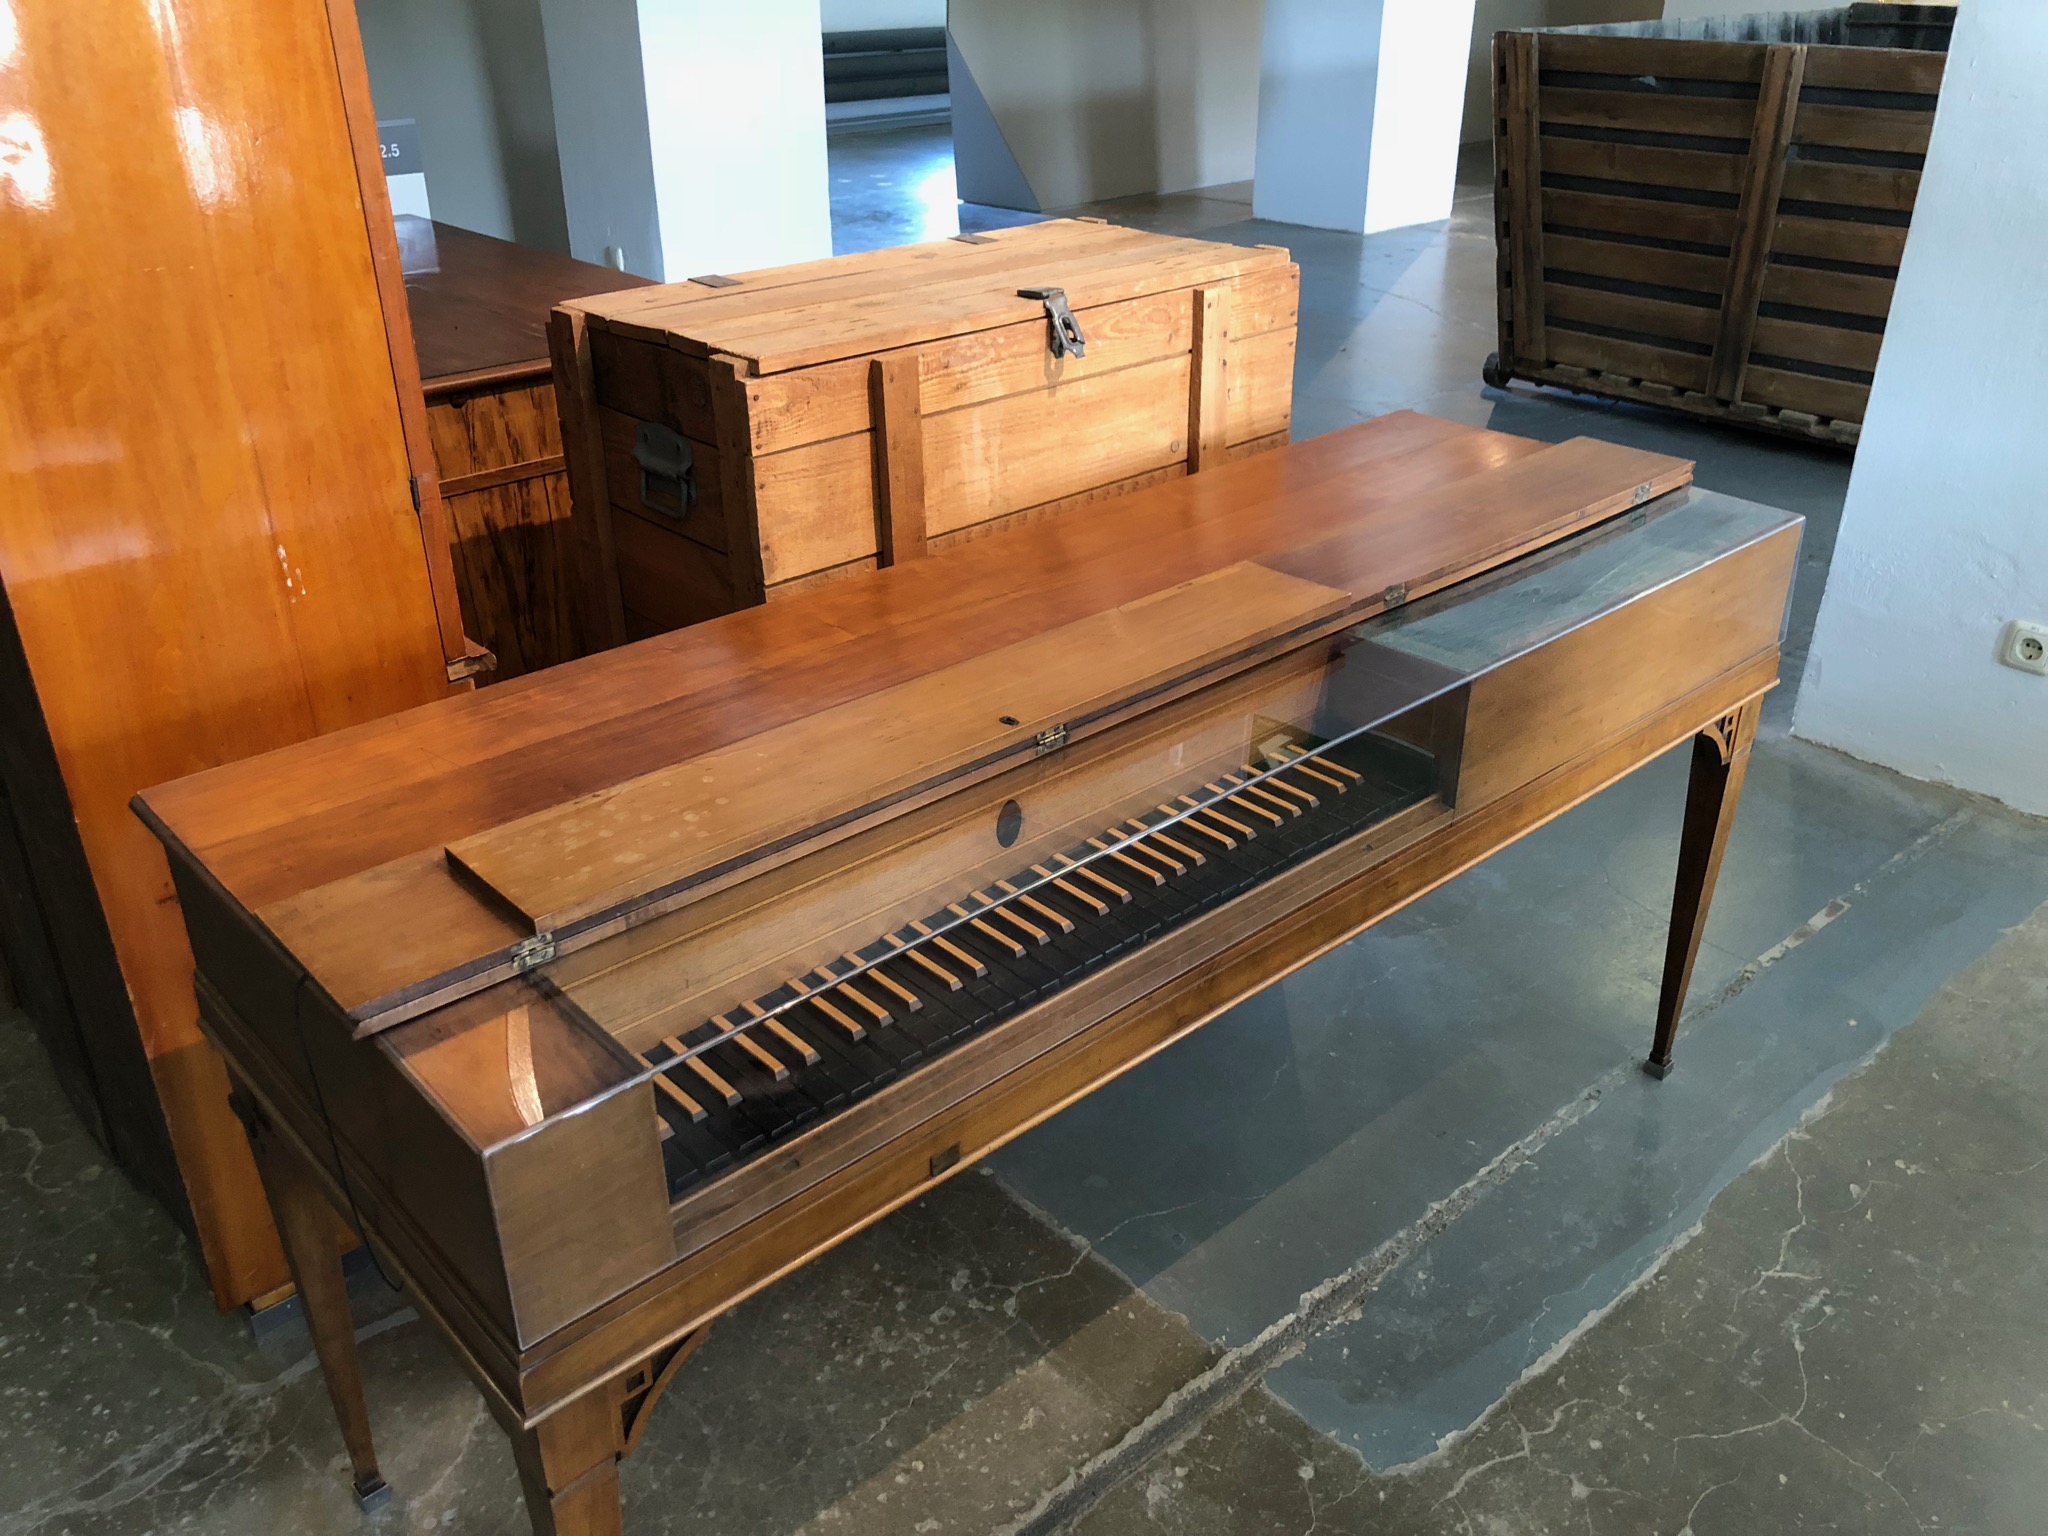 Piano made by Prisoners